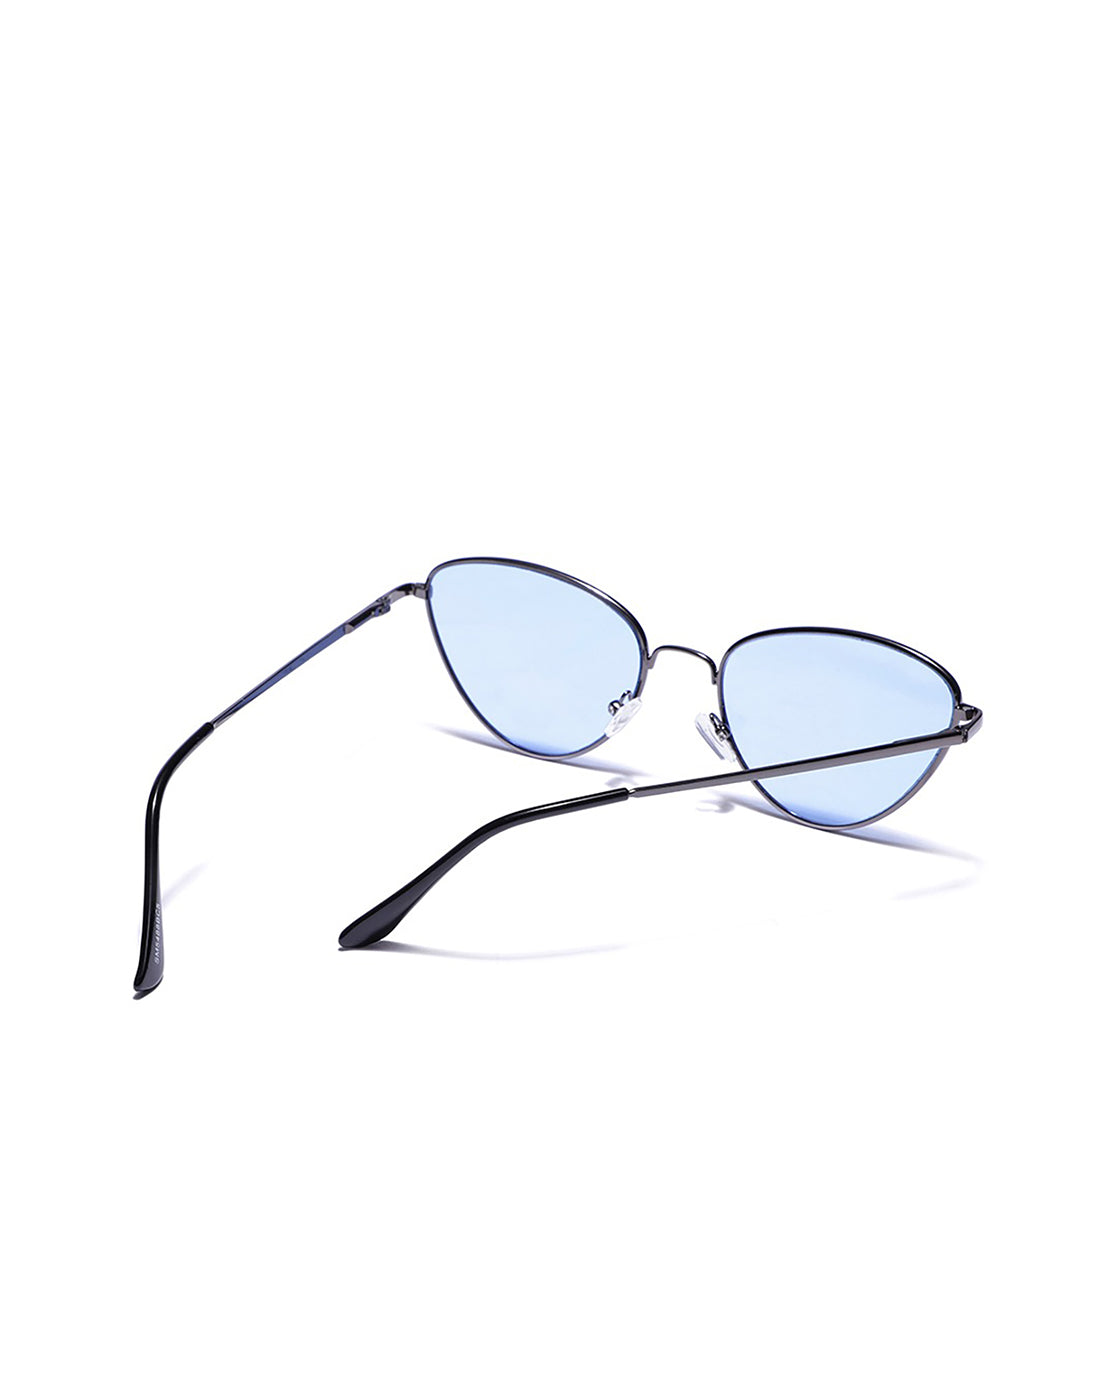 Carlton London Butterfly Sunglasses With Uv Protected Lens For Women